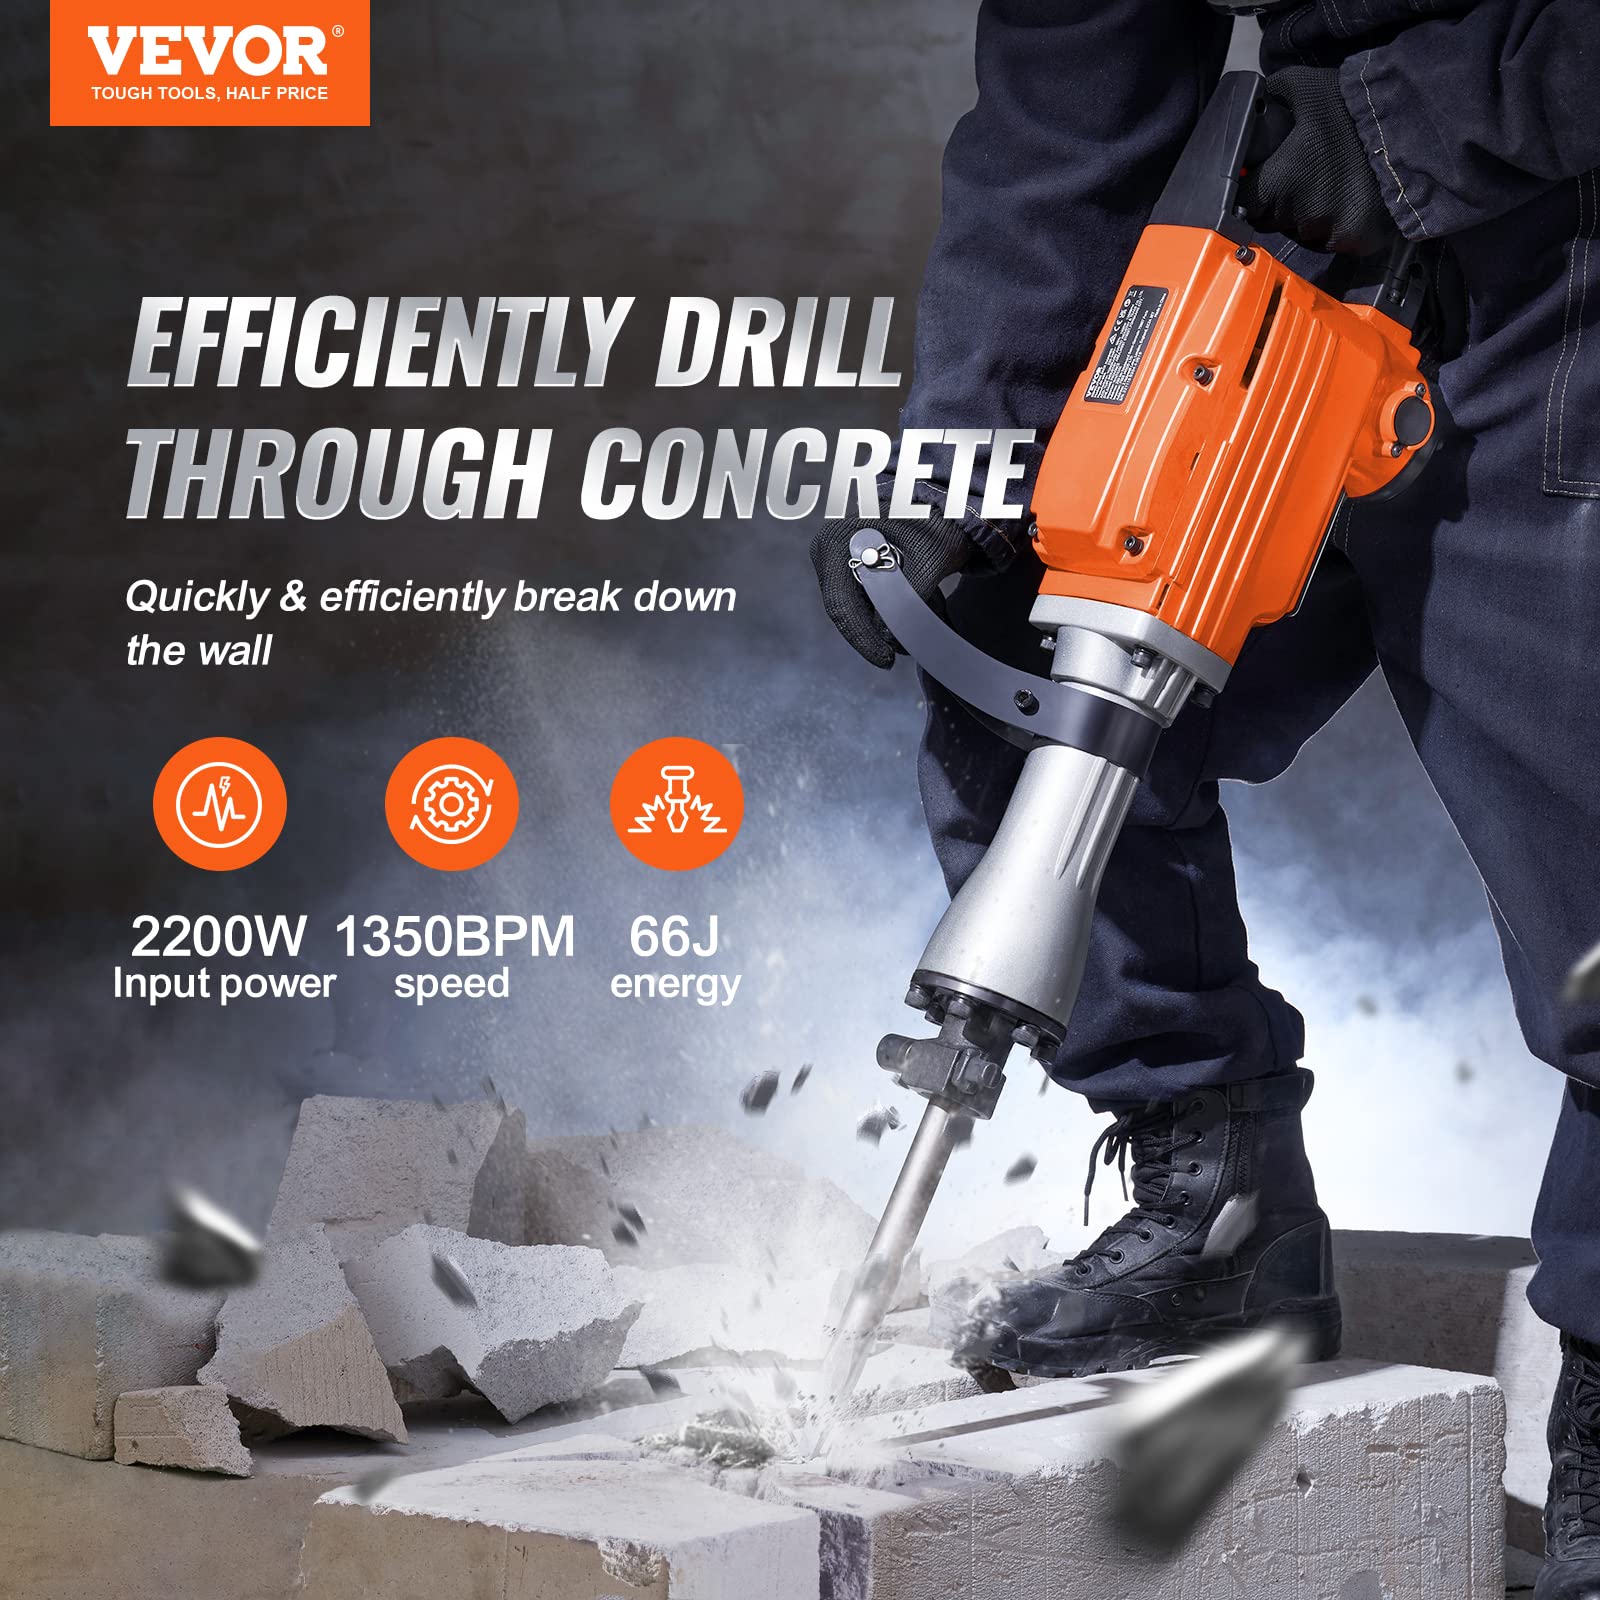 VEVOR Demolition Jack Hammer, 2200W 1400 BPM Jack Hammer Concrete Breaker, Heavy Duty Electric Jack Hammer 4pcs Chisels Bit with Gloves, 360°C Swiveling Front Handle for Trenching and Breaking Holes